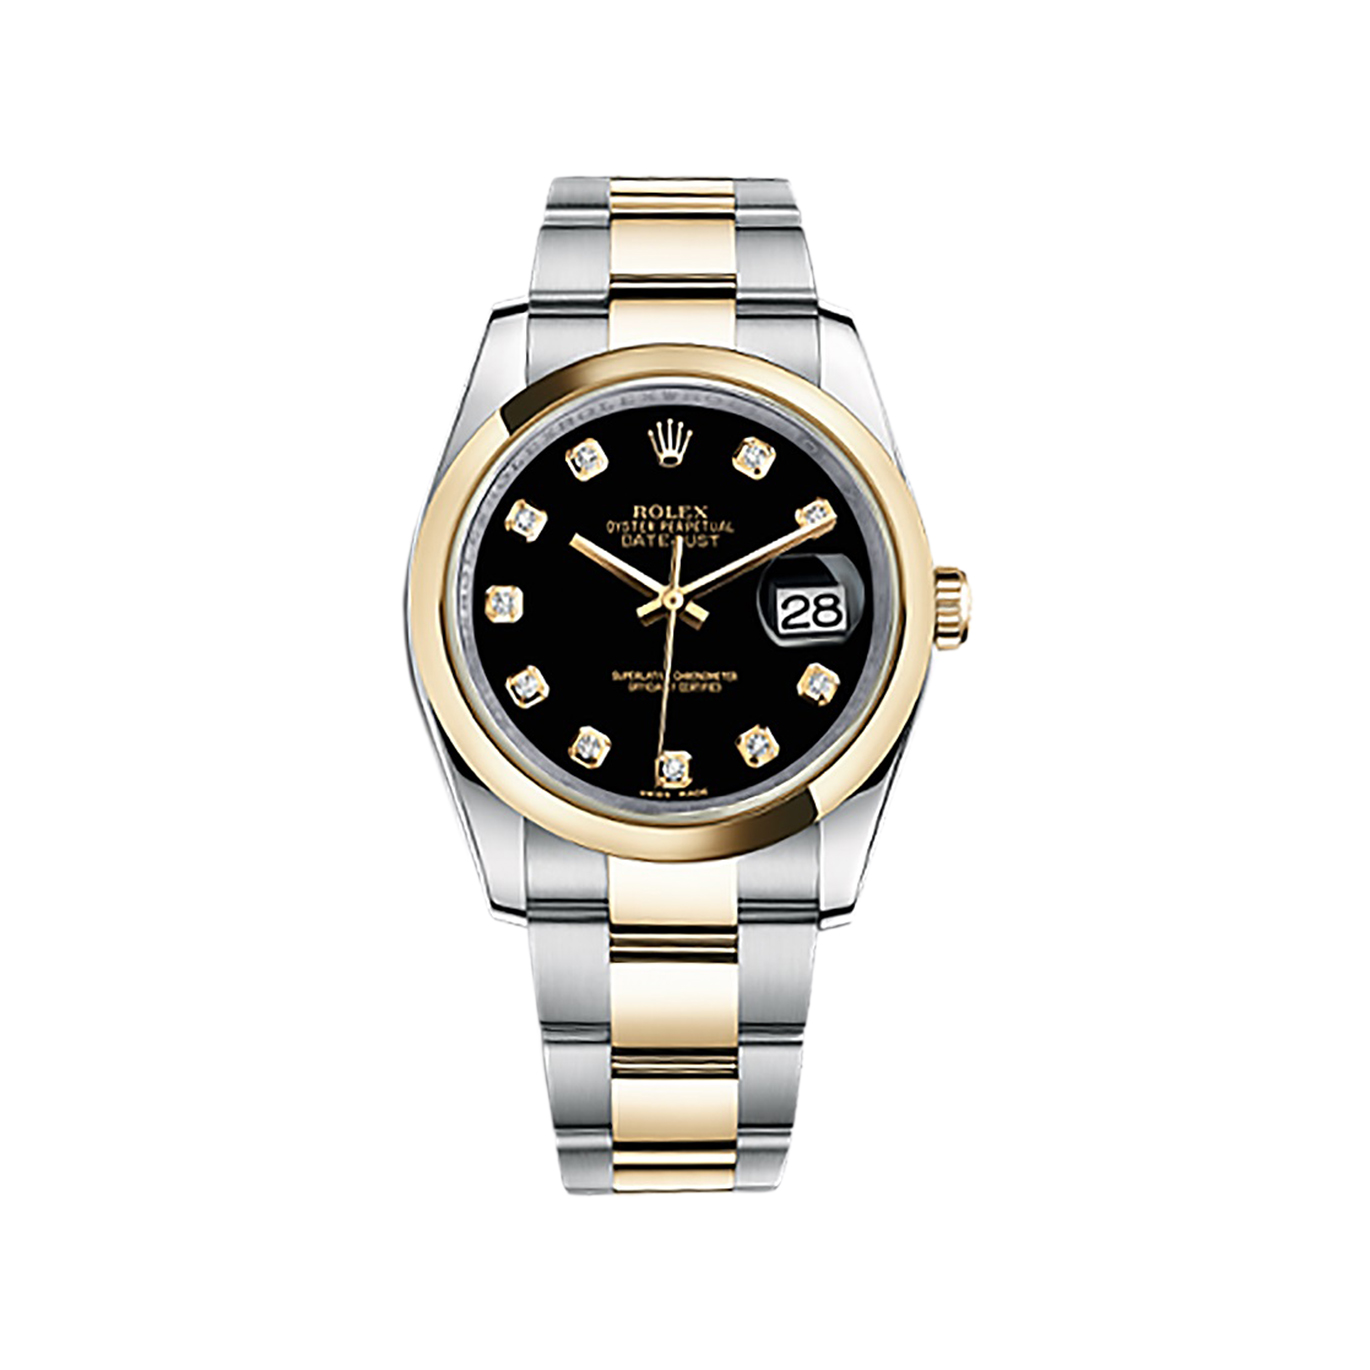 Datejust 36 116203 Gold & Stainless Steel Watch (Black Set with Diamonds)